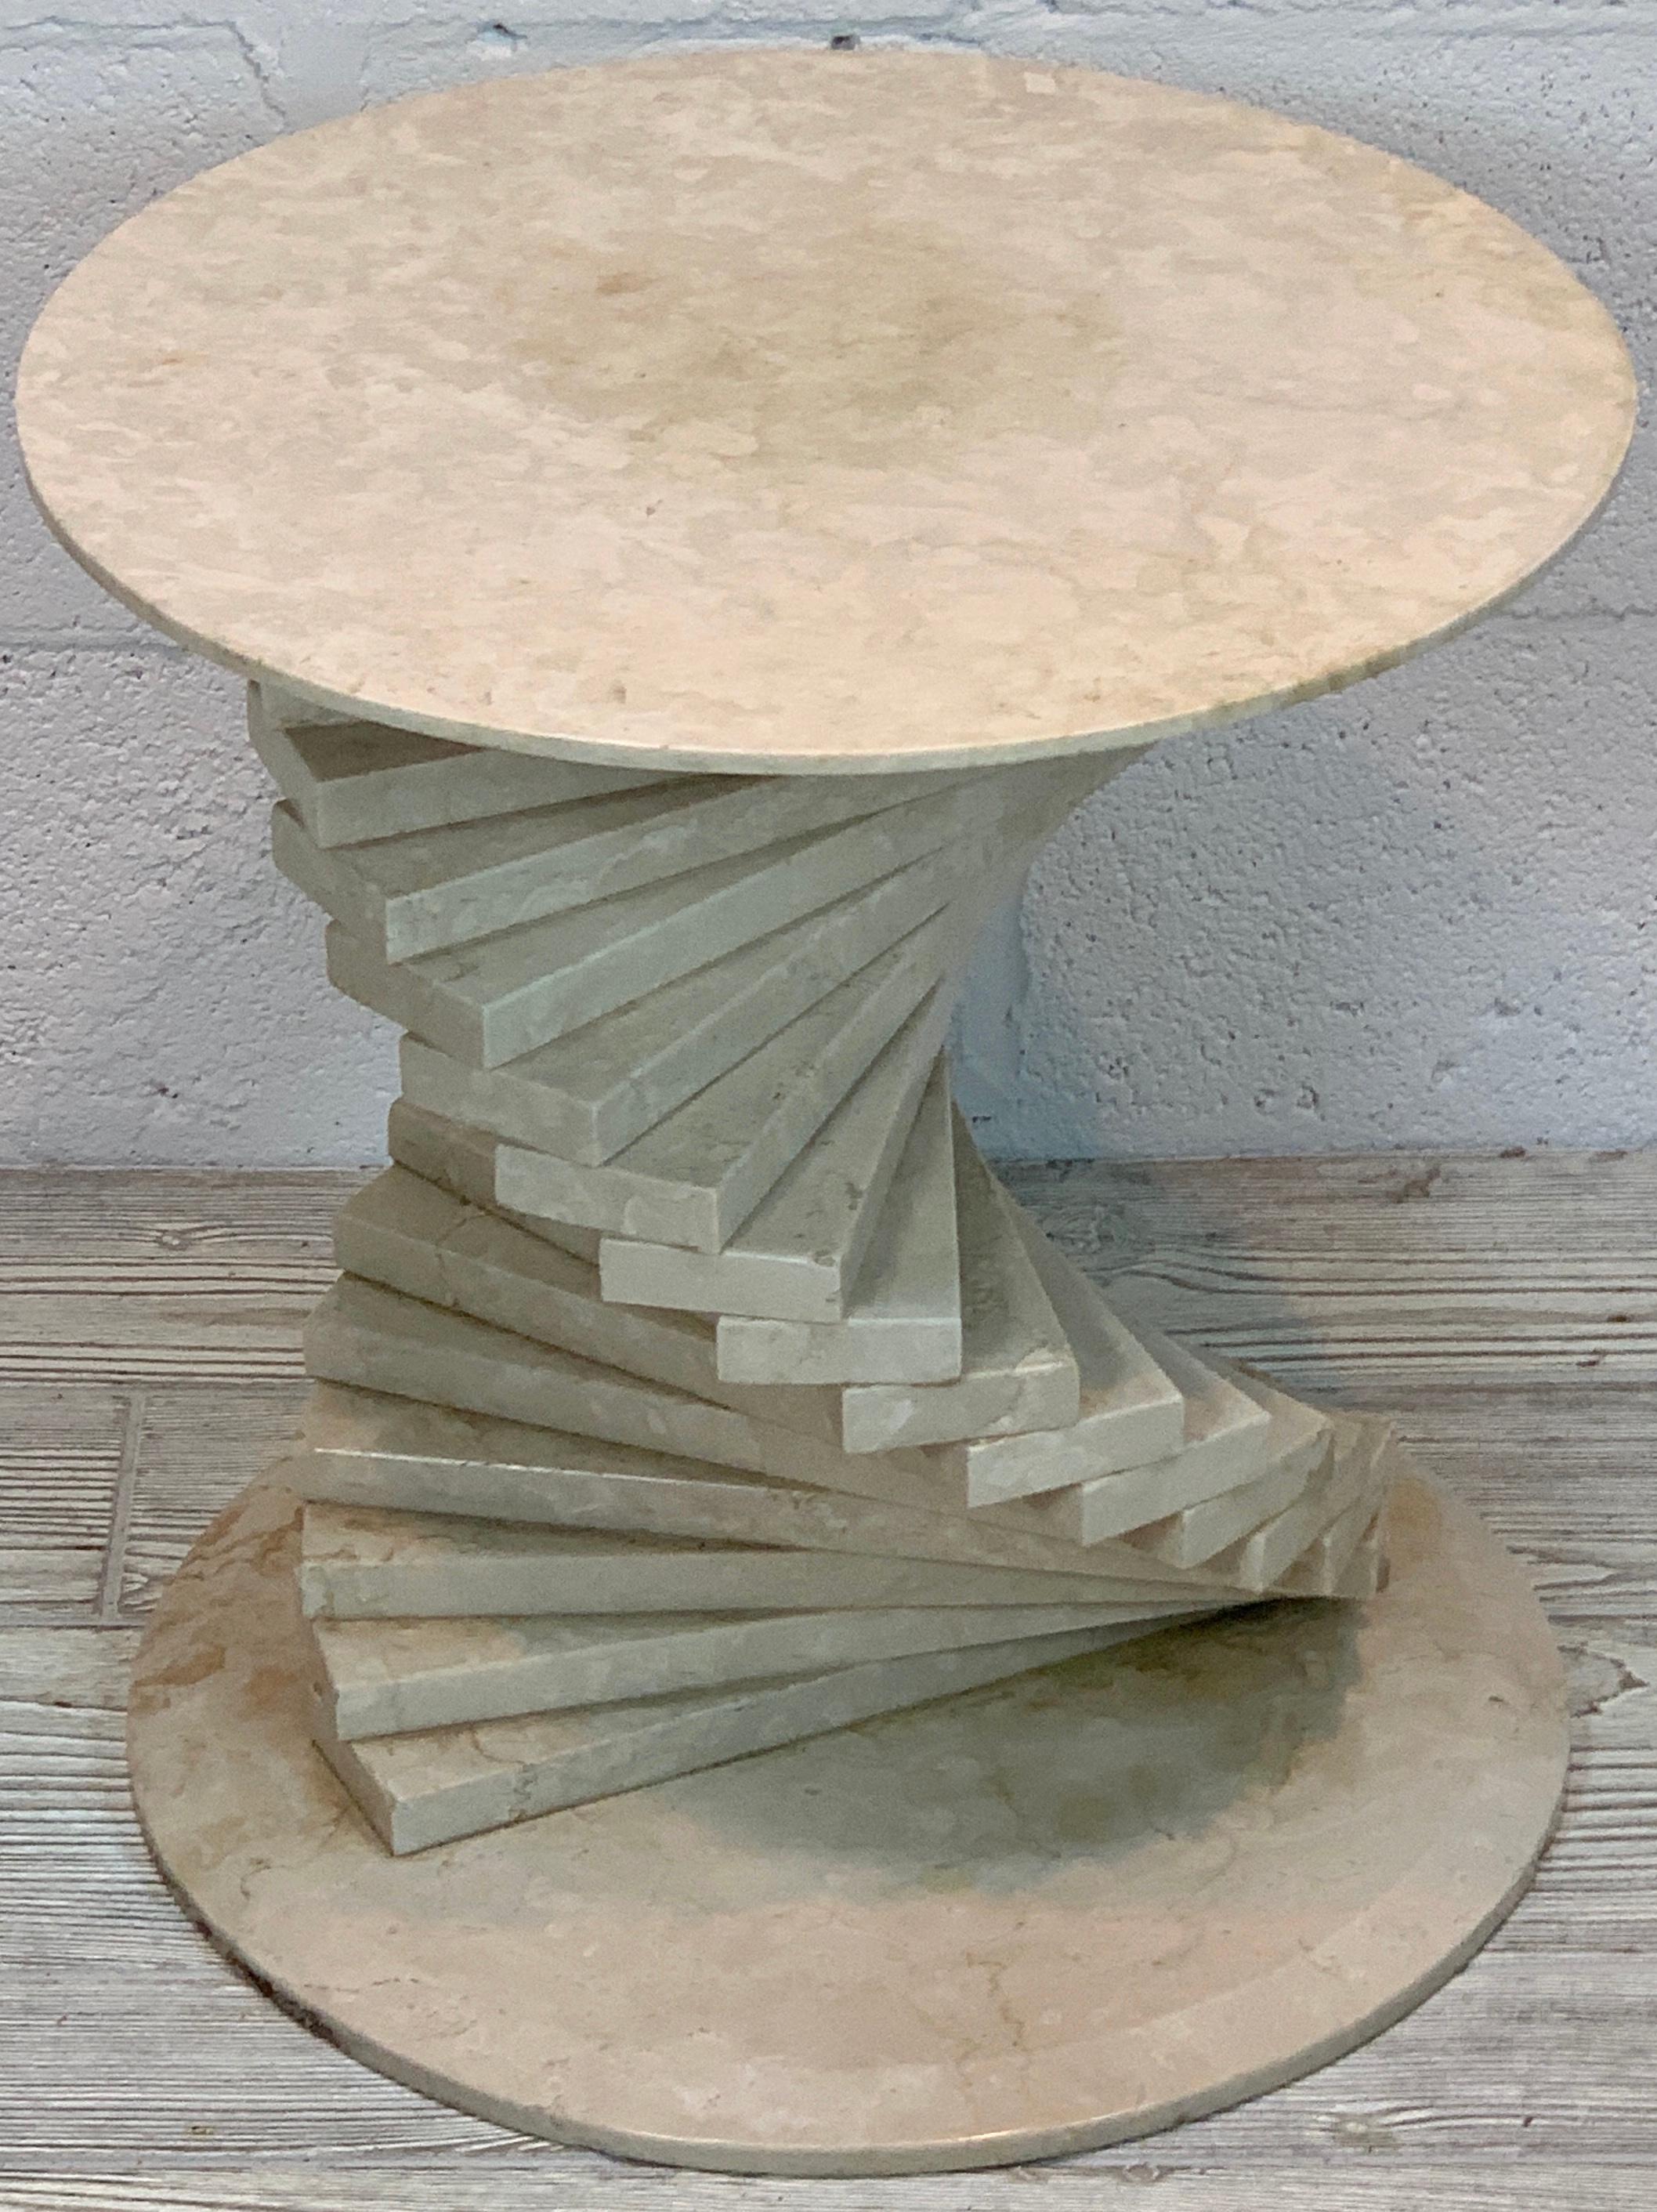 Italian modern marble spiral side table, standing 17- inches high, with a 16-inch diameter top, raised on numerous spiral 'cuboids' resting on a 15.5-inch diameter base.
 